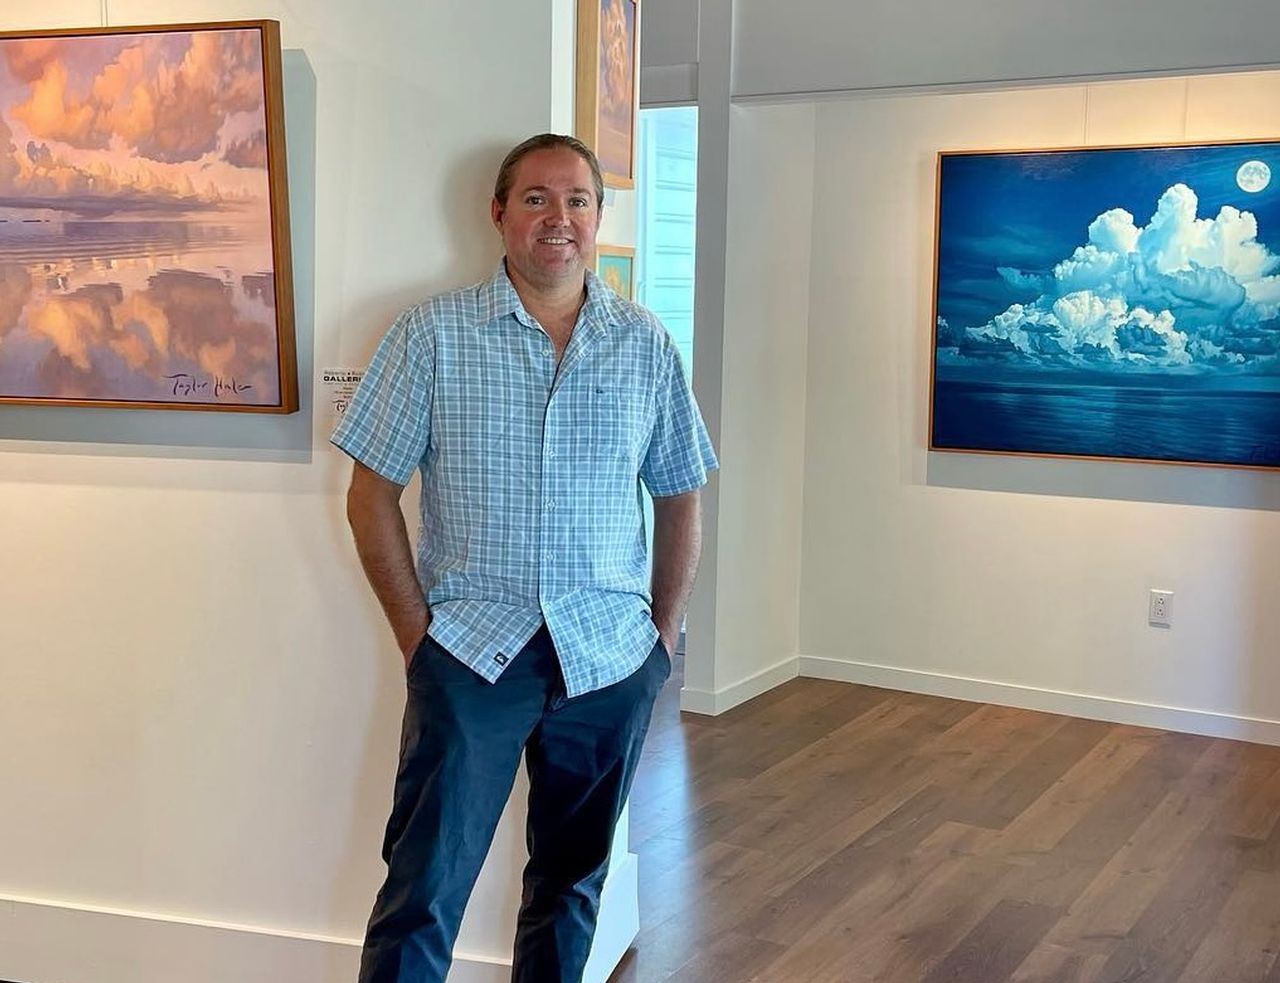 Artist Taylor Hale at the opening for his gallery showing at Kona Kai Resort in Key Largo. 